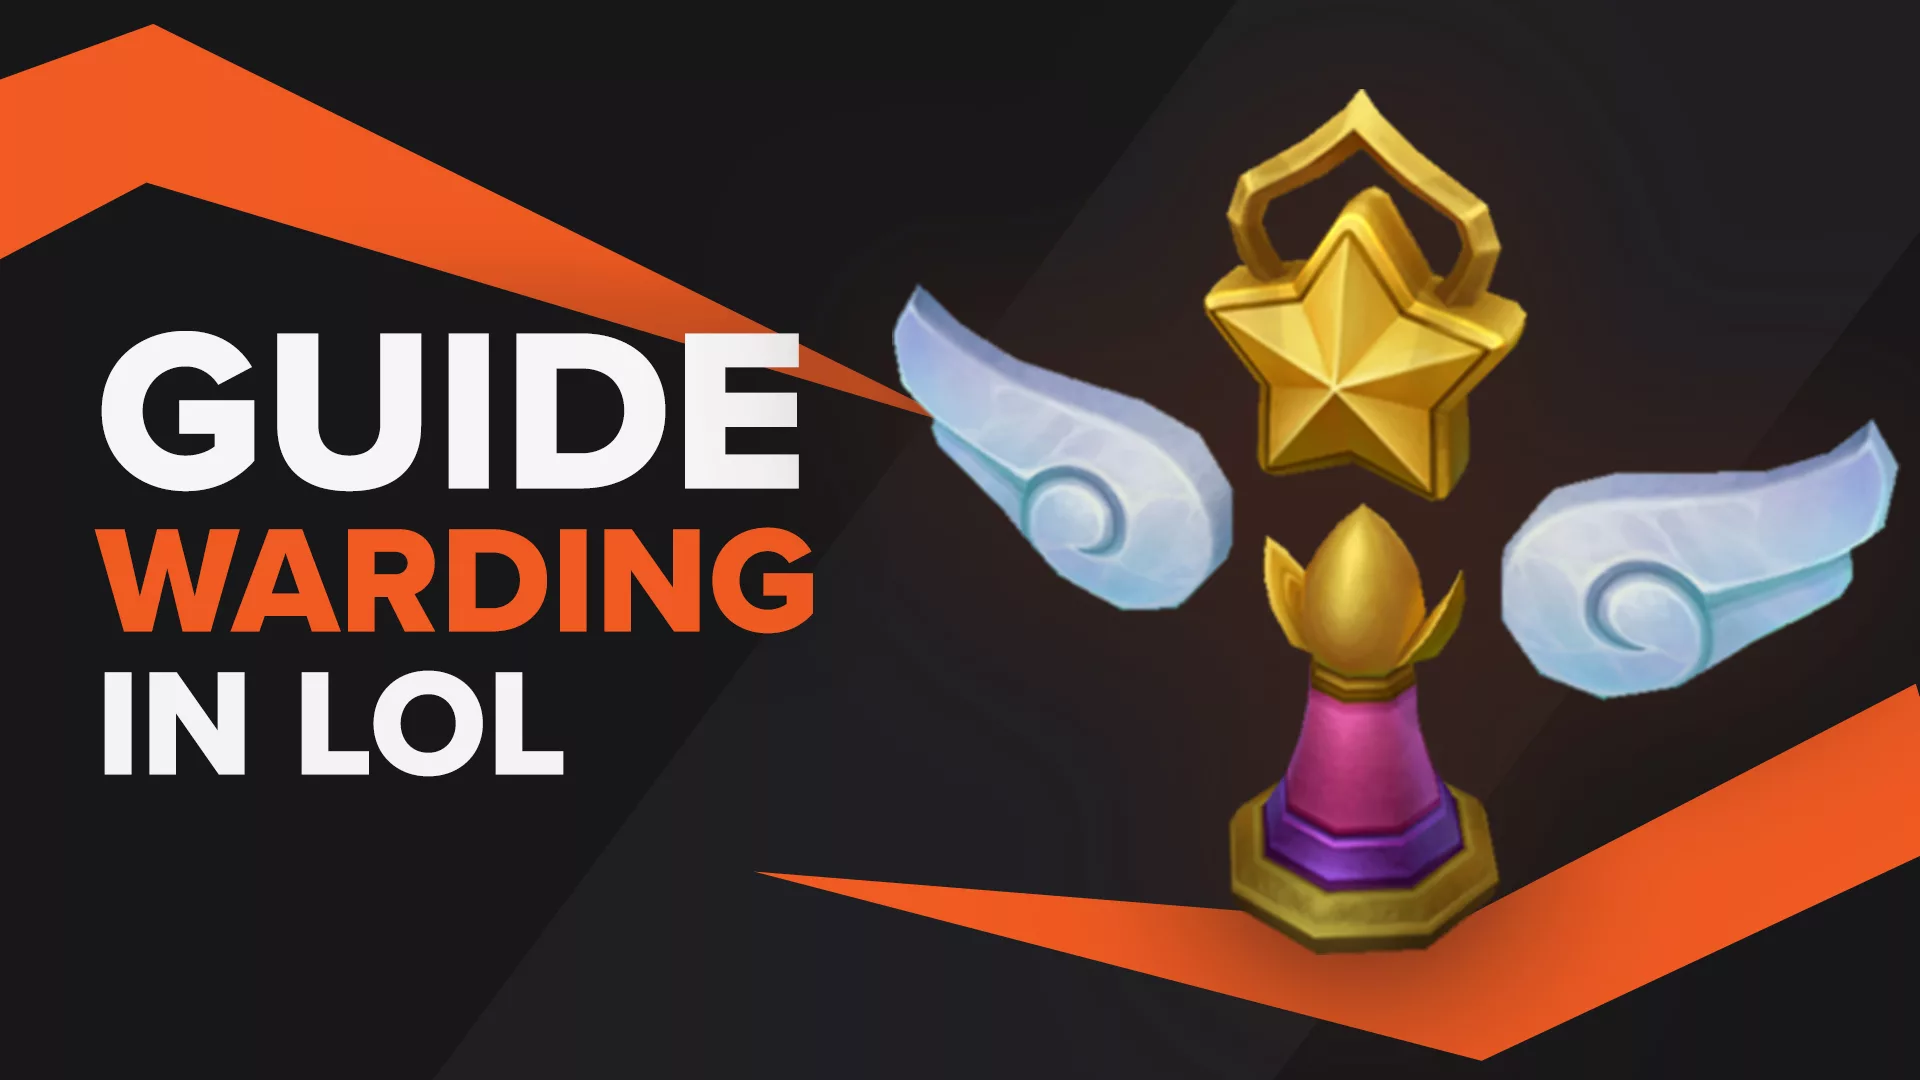 In-depth Guide to Warding in League of Legends